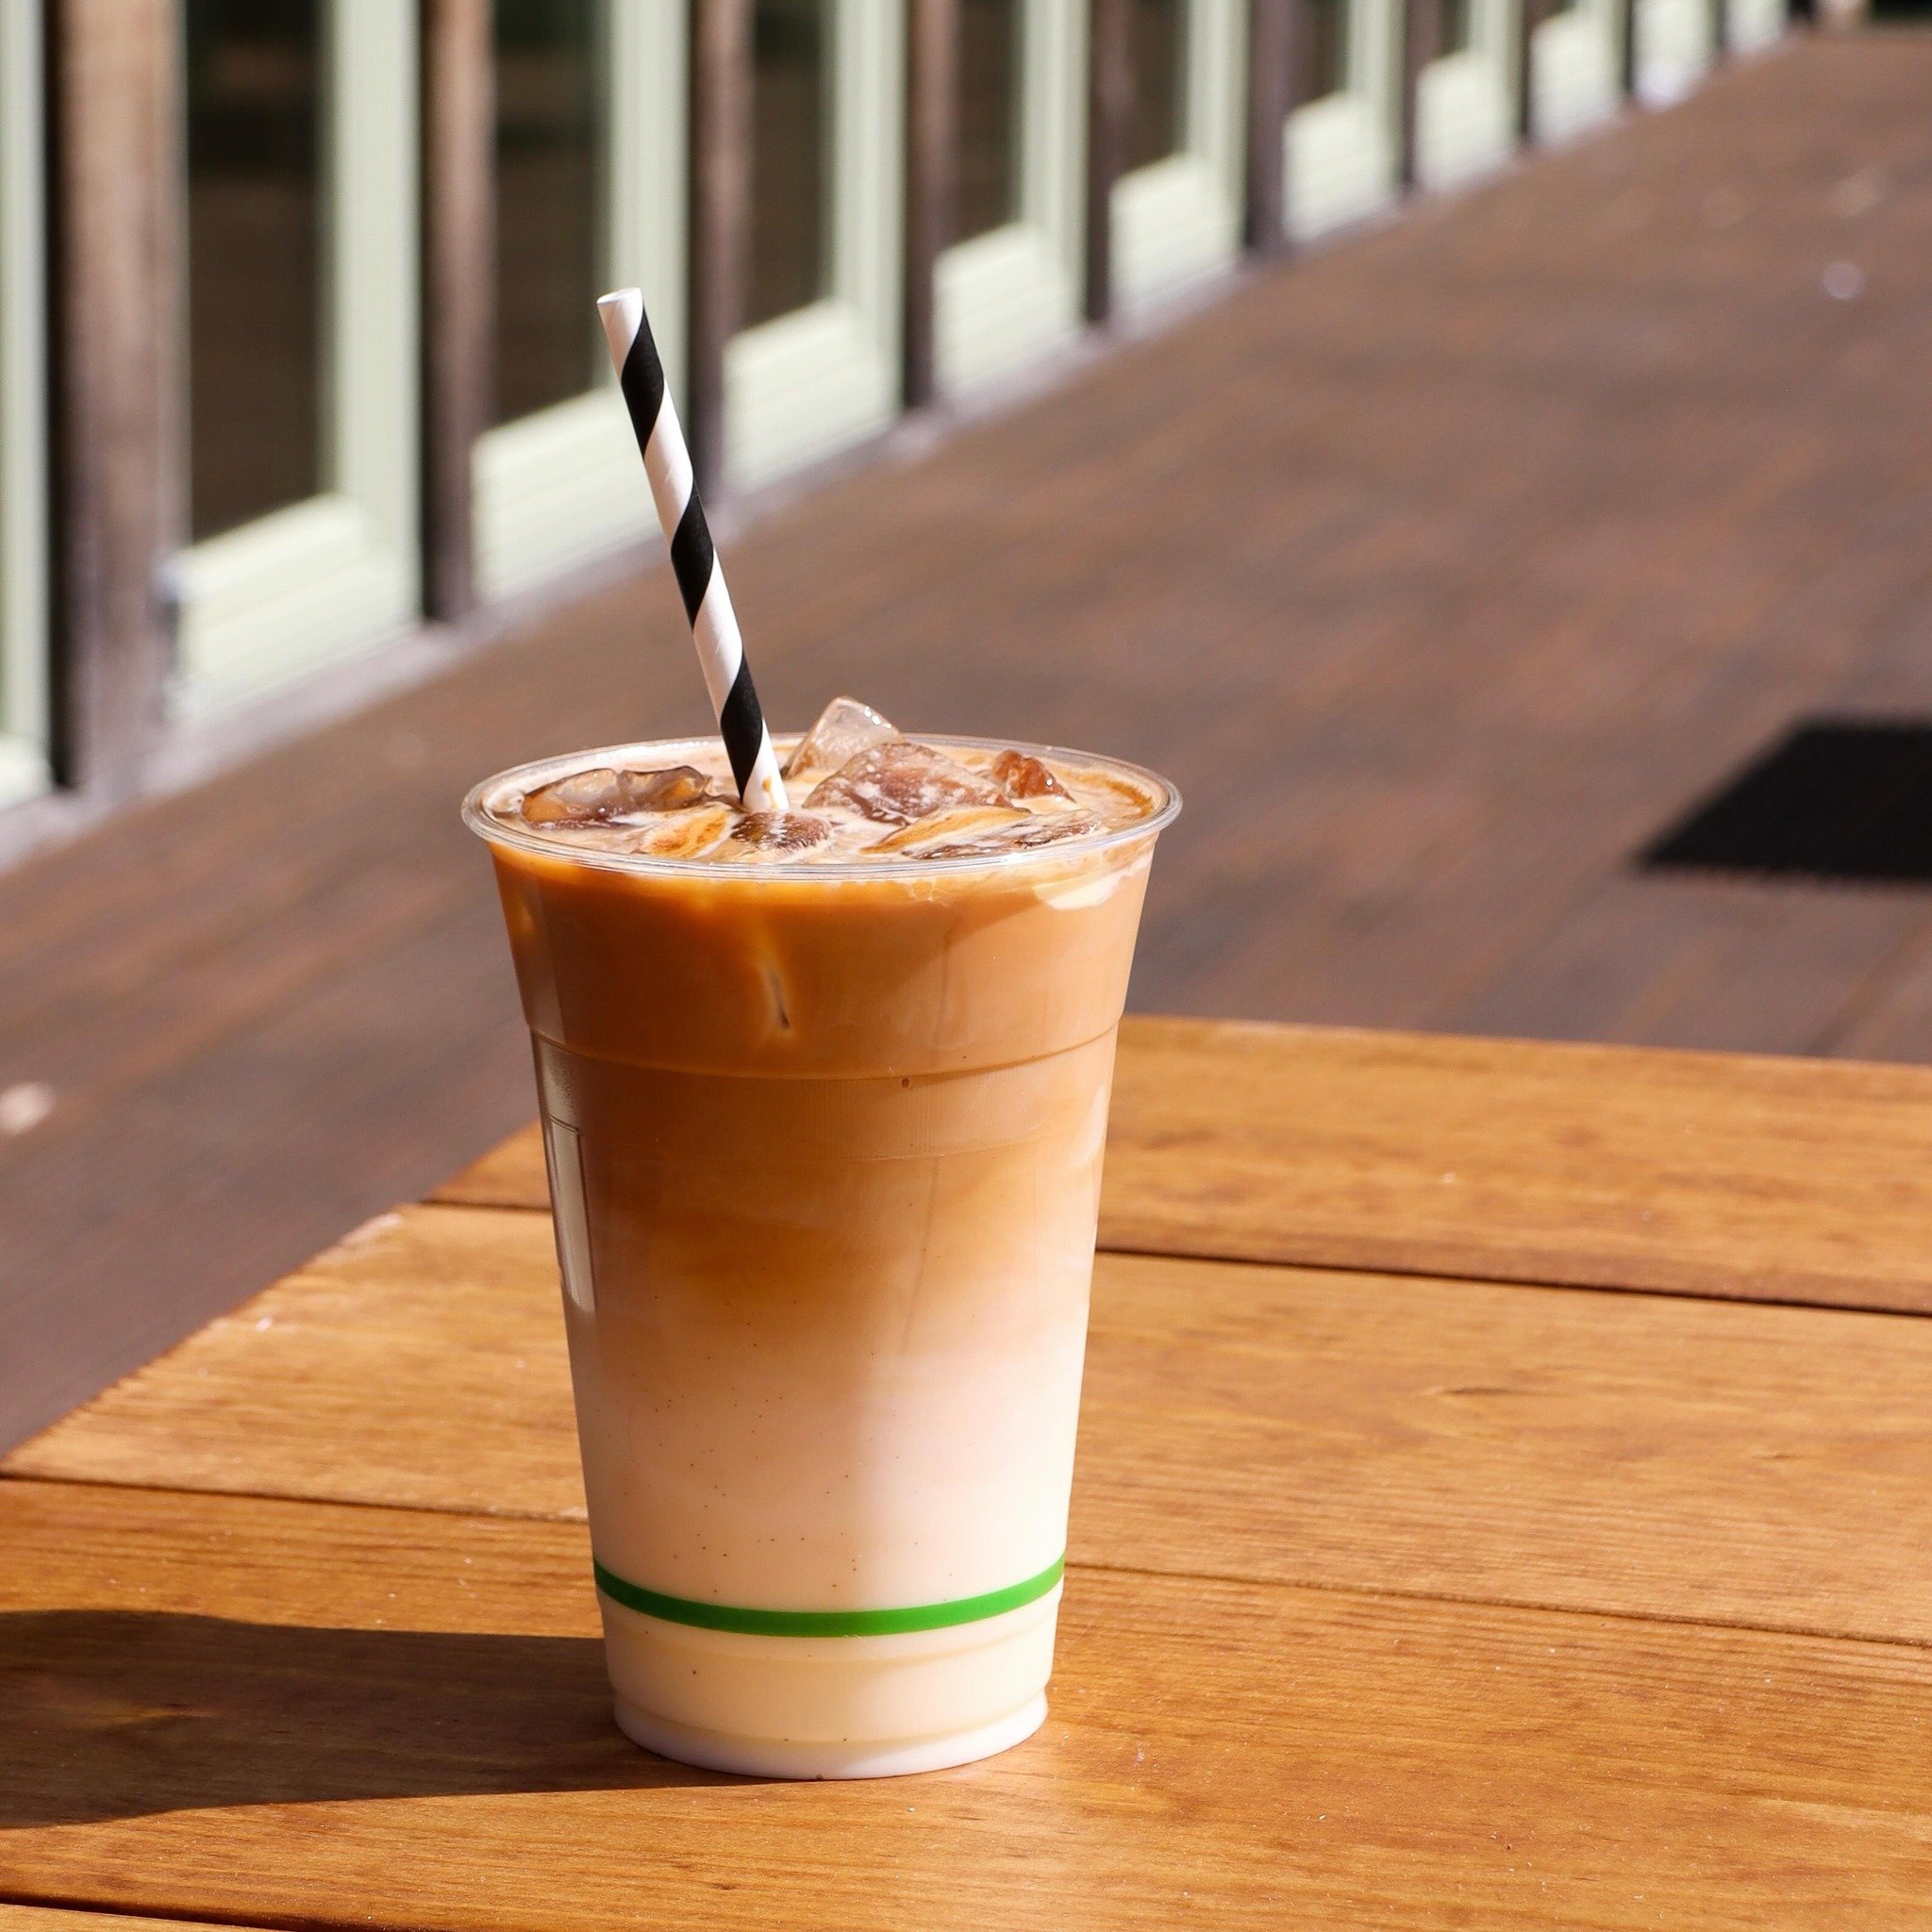 It&rsquo;s iced coffee season 😎

Find us basking in the sunshine all weekend long 🍐